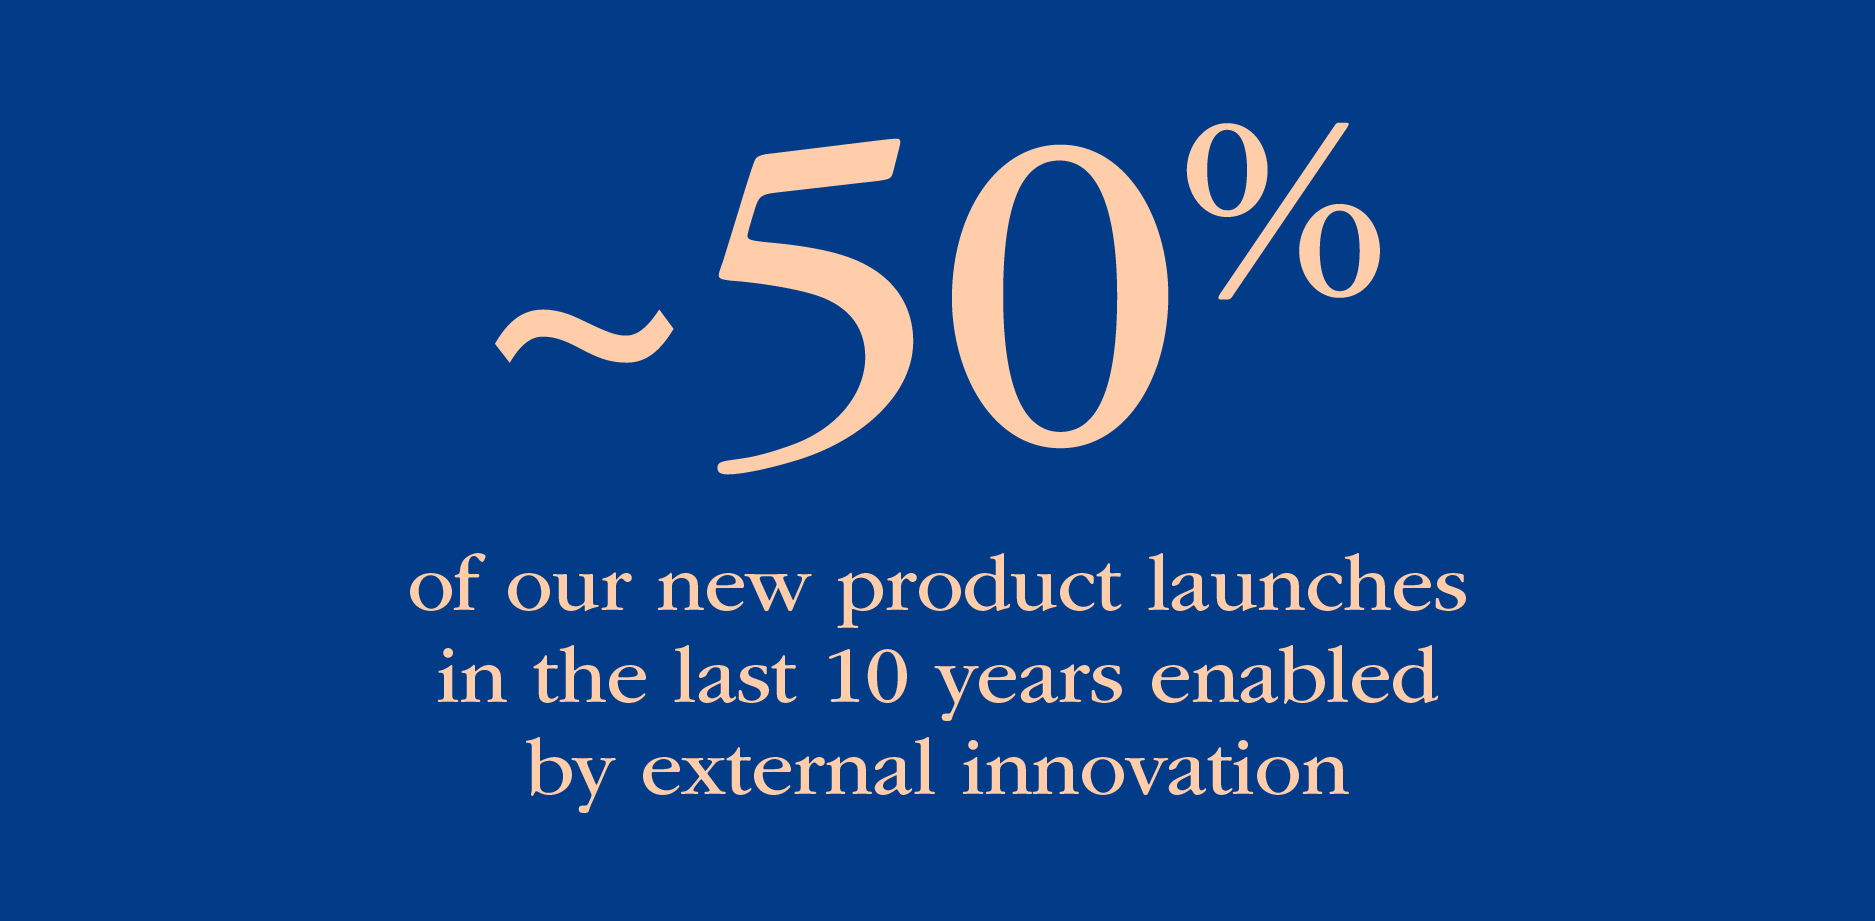 50% of our new product launches in the last 10 years enabled by external innovation